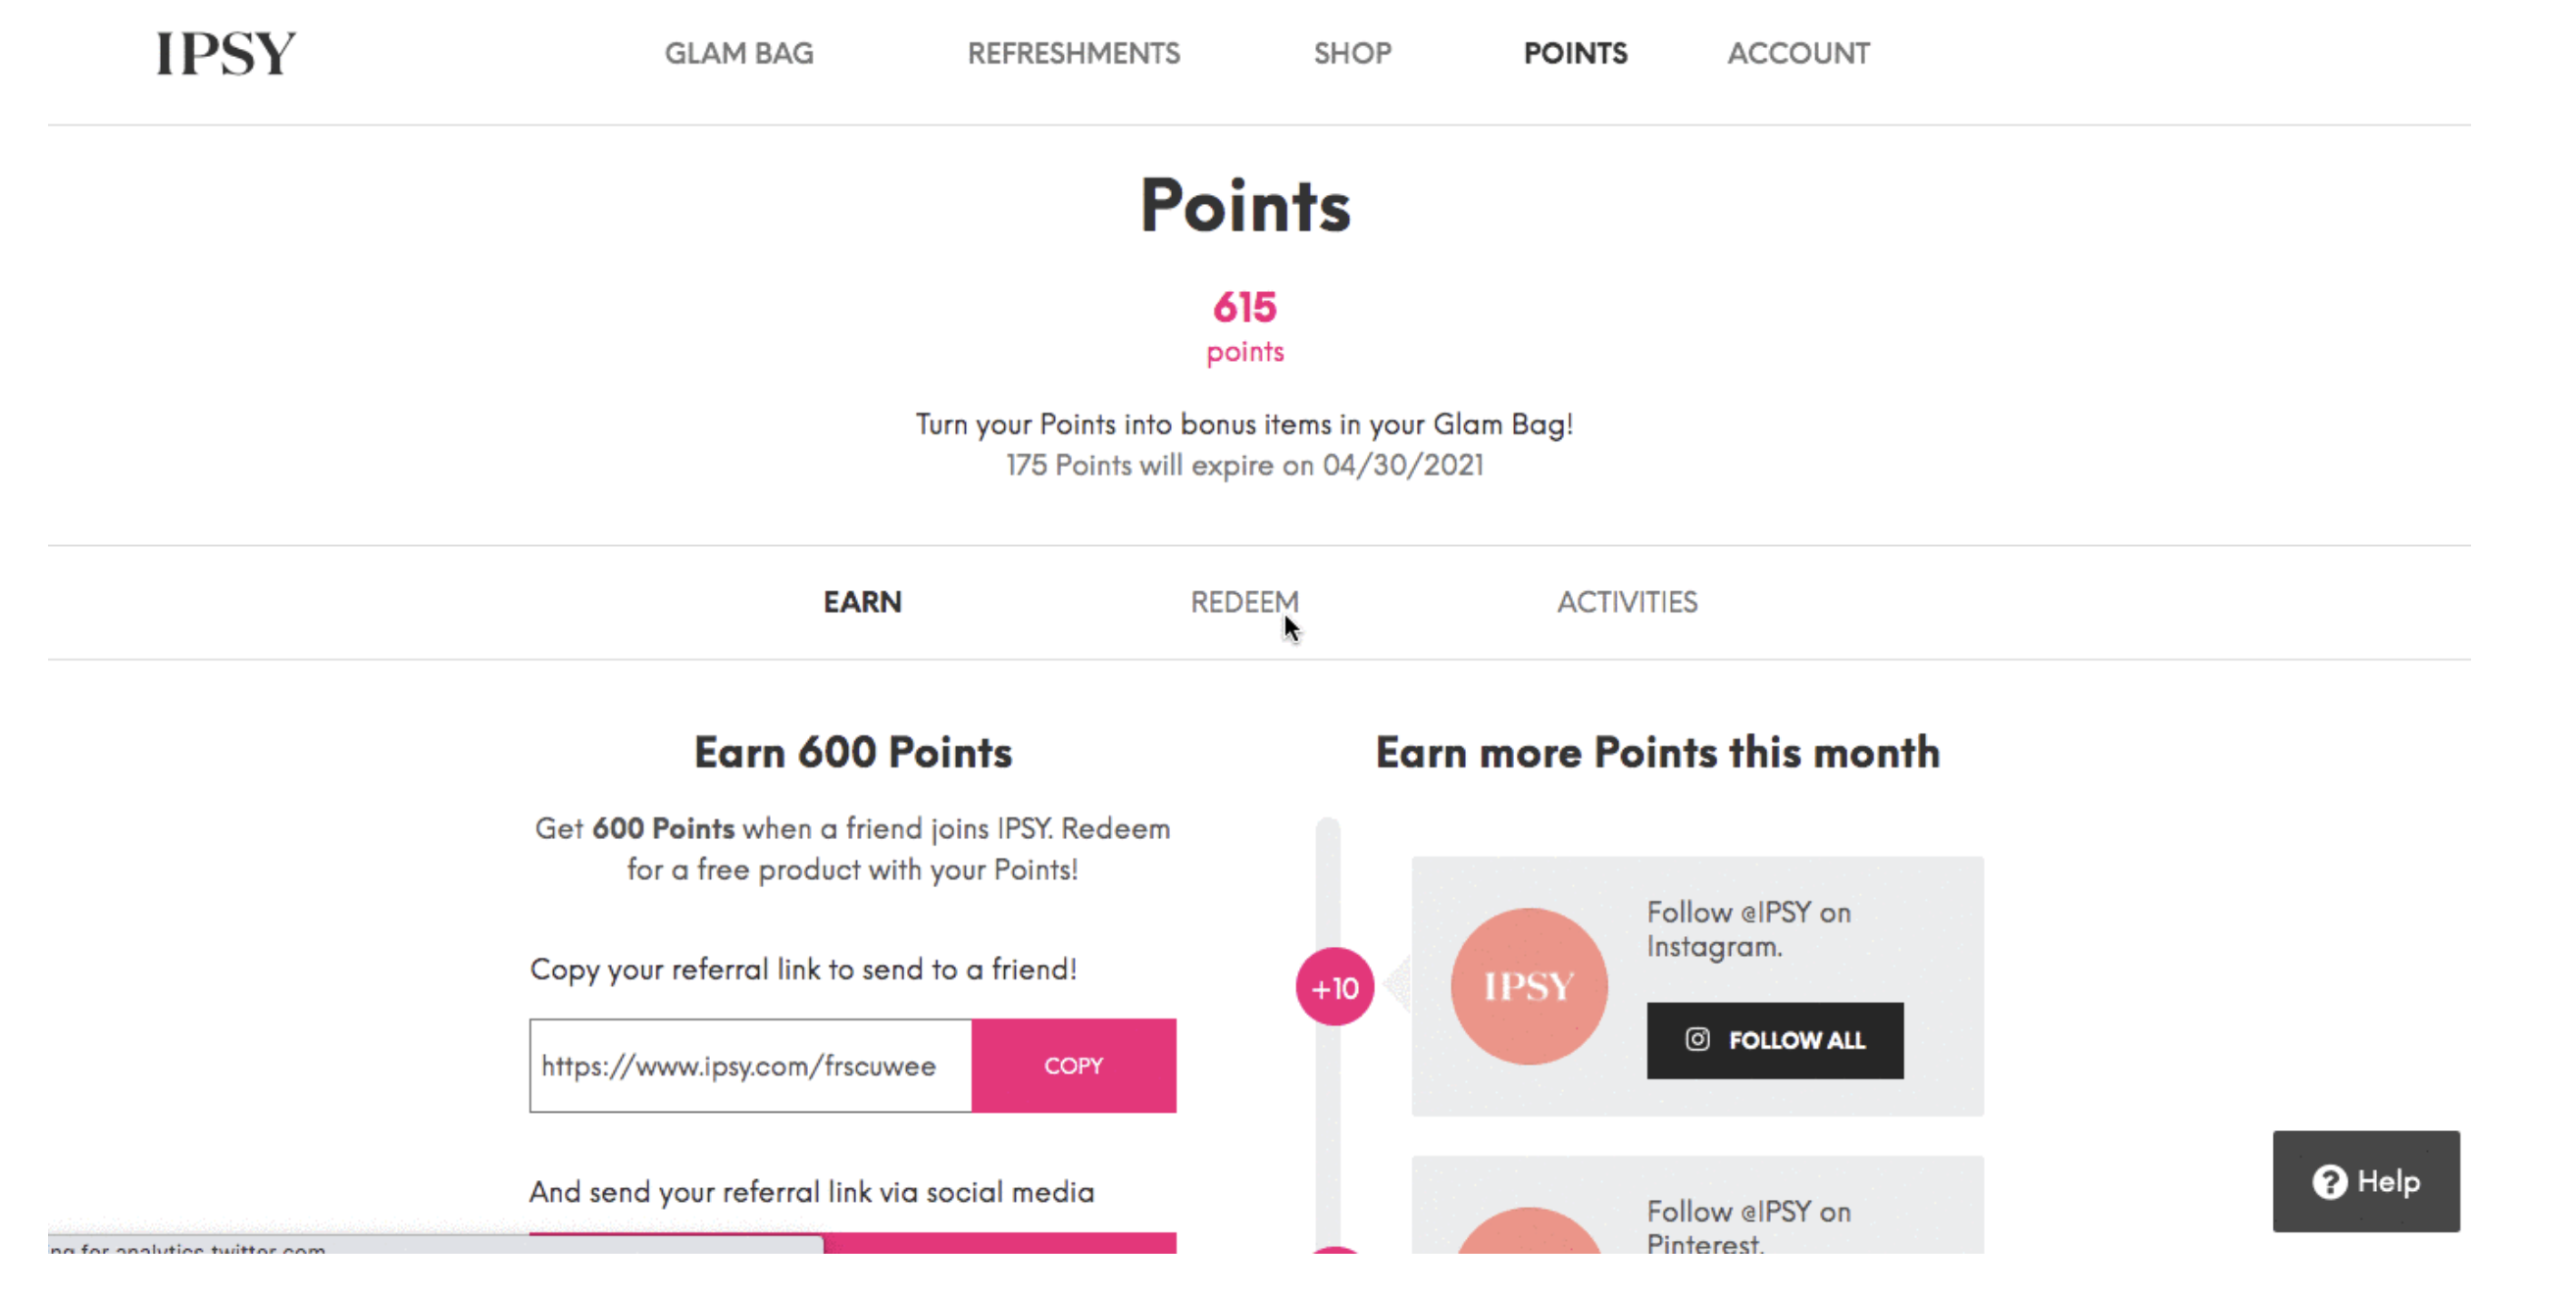 Screenshots of Ipsy's point system